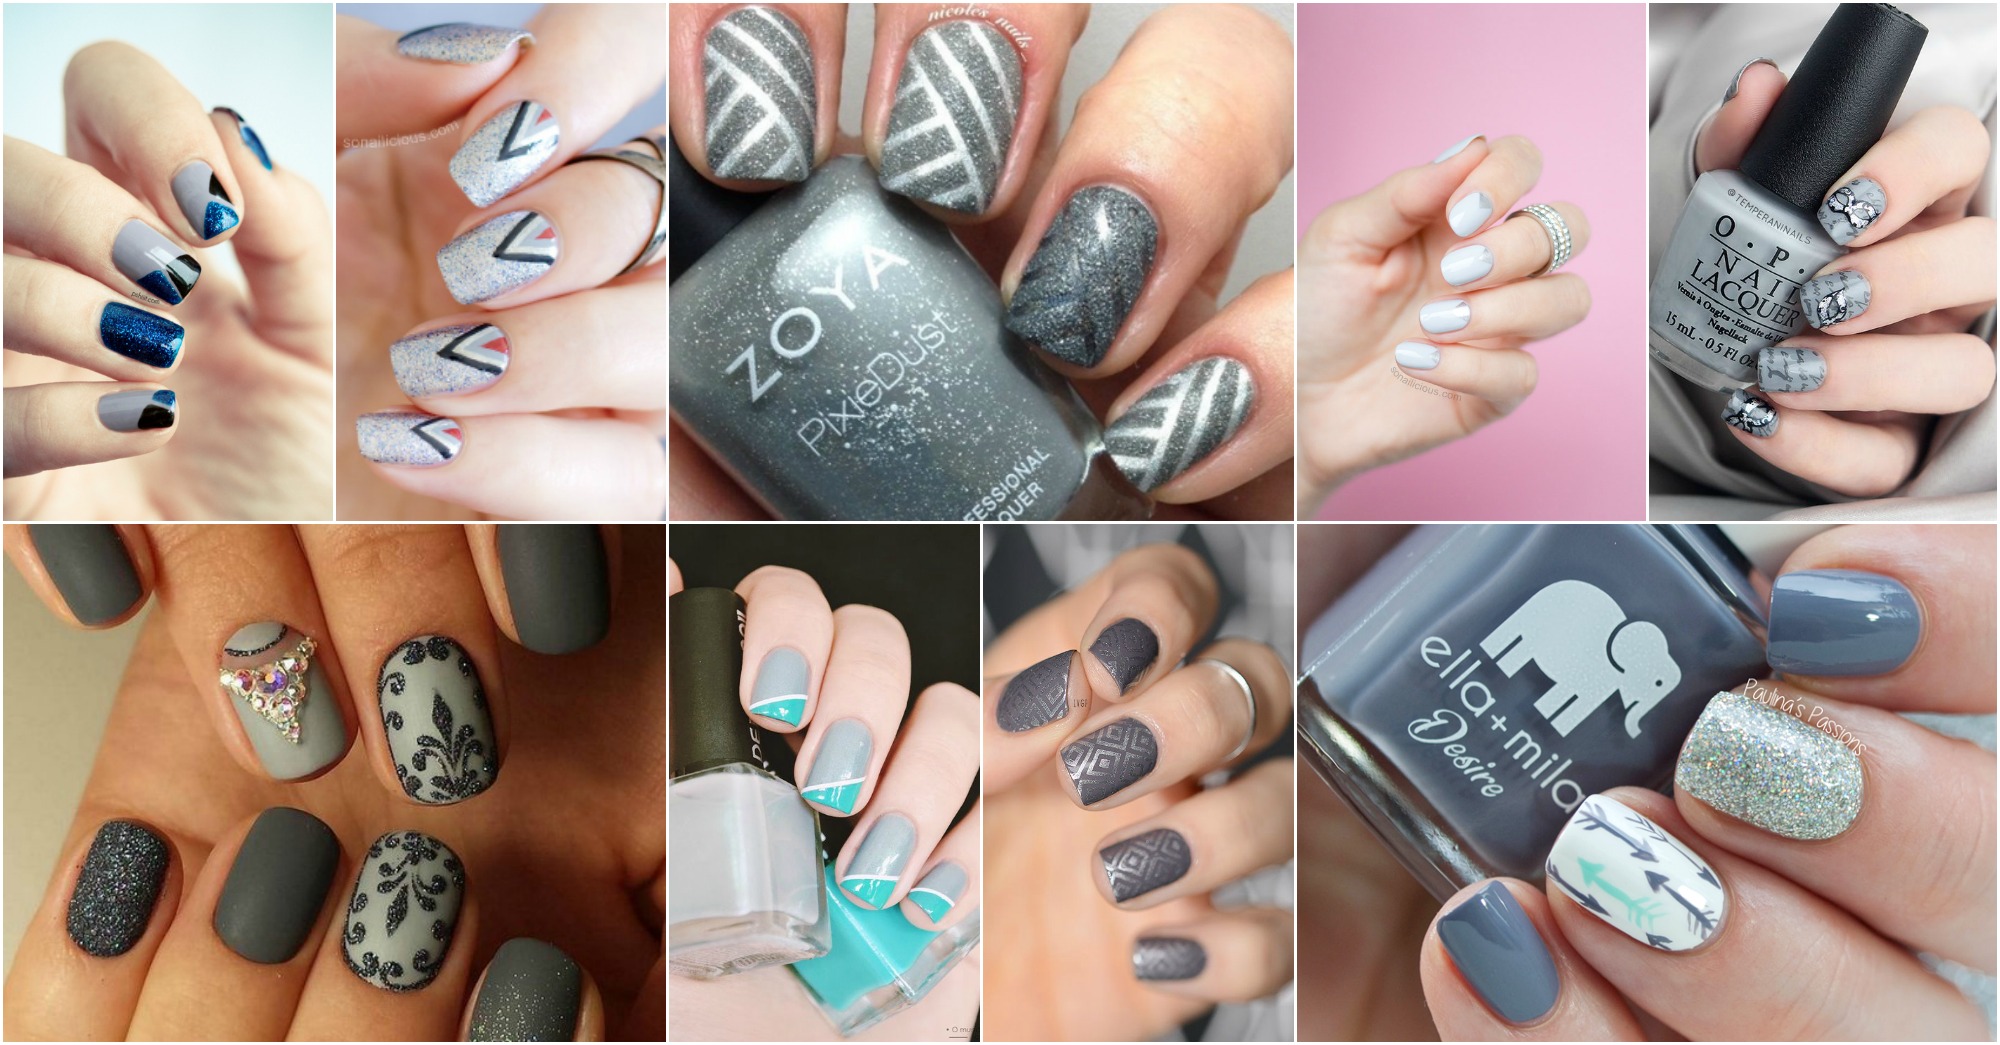 Chic Black and Grey Nail Designs - wide 4